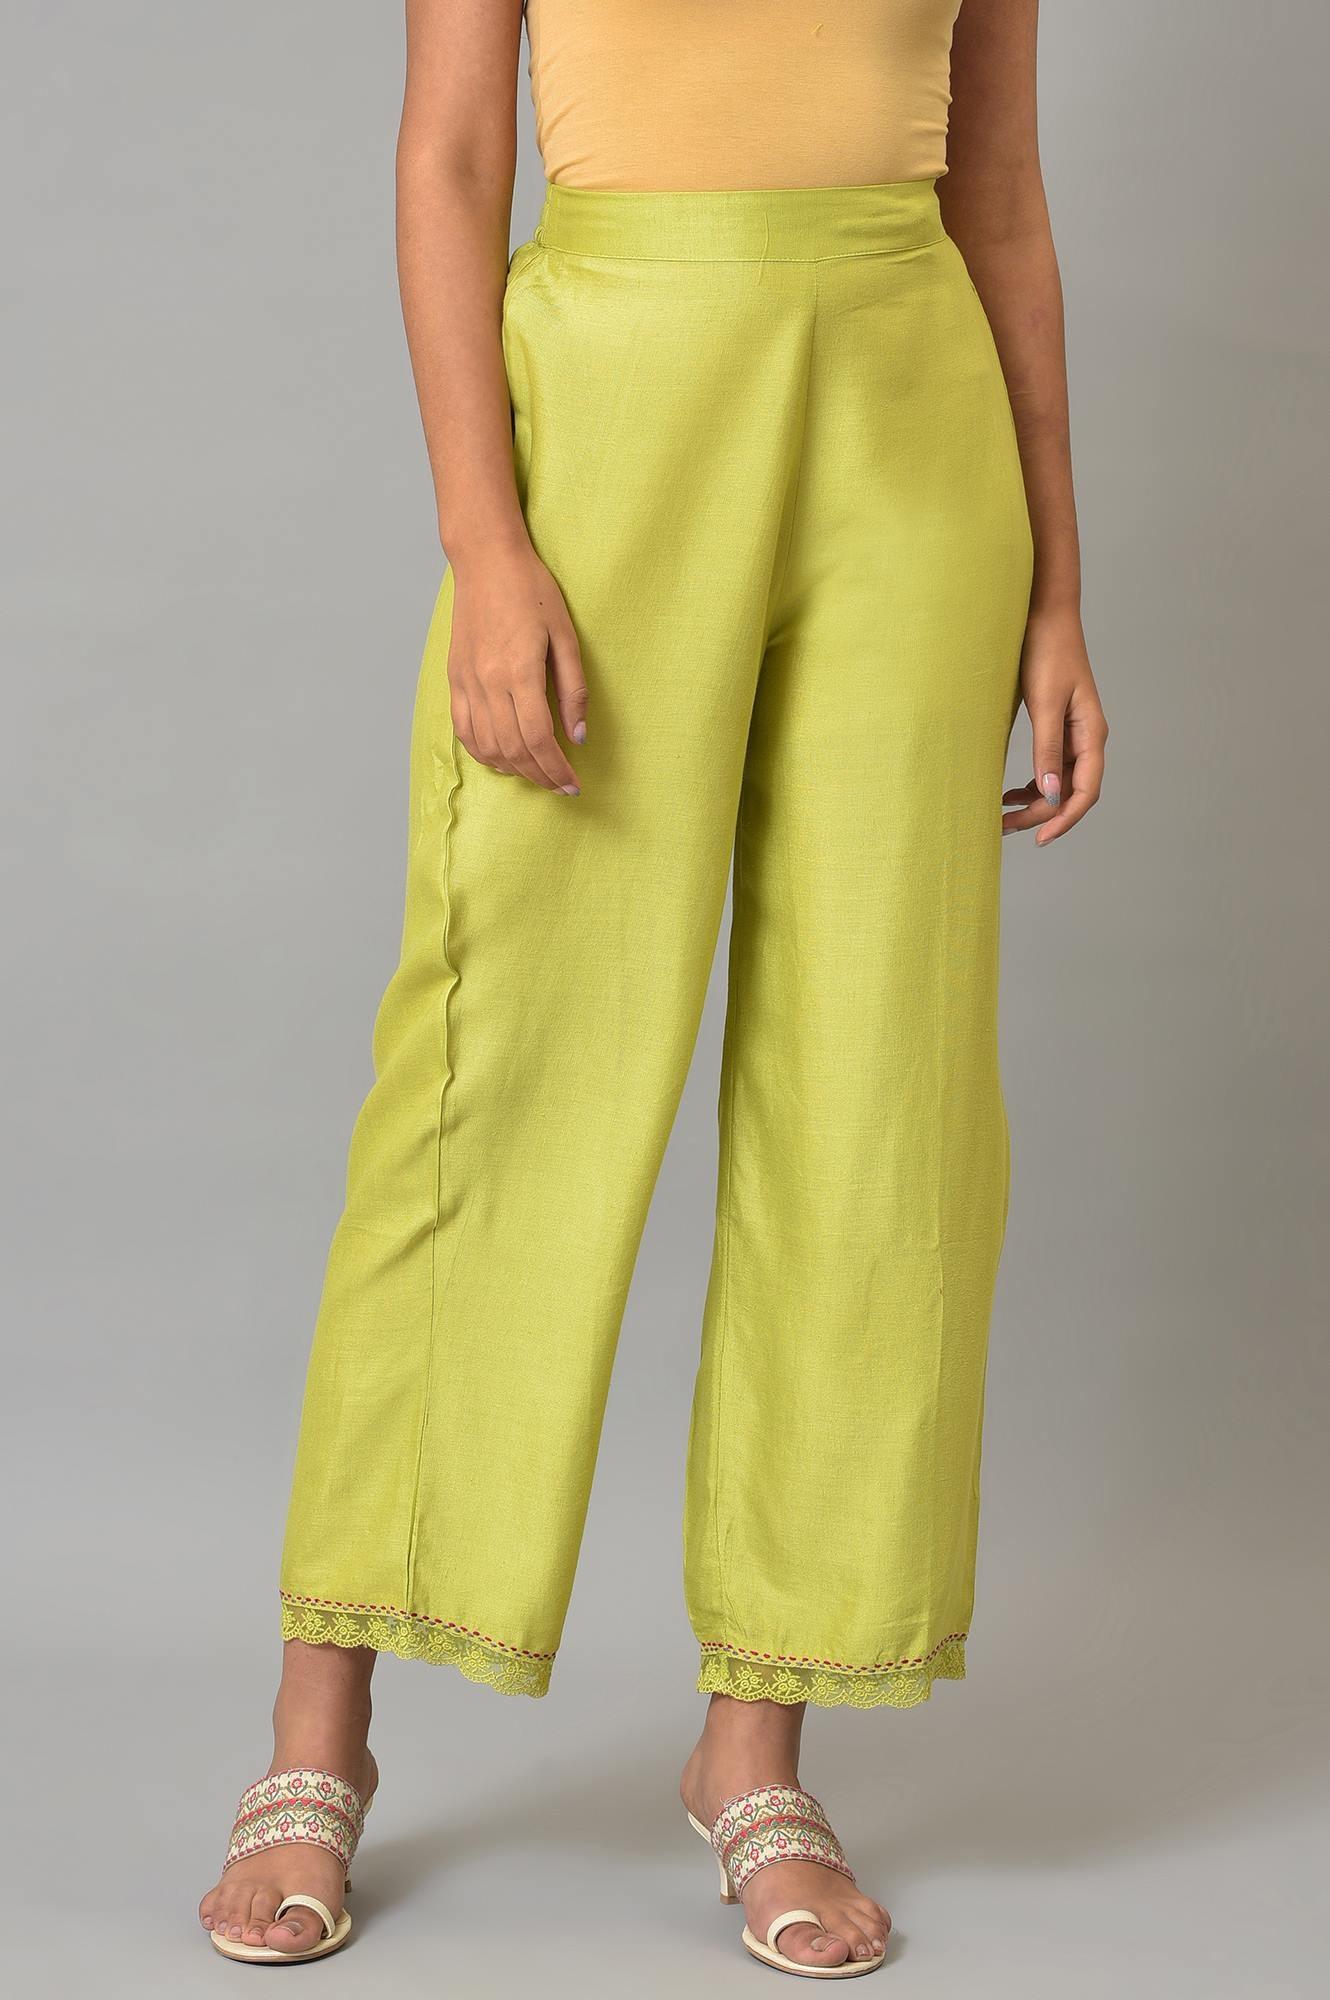 Light Green Slim Pants With Lace Detail - wforwoman